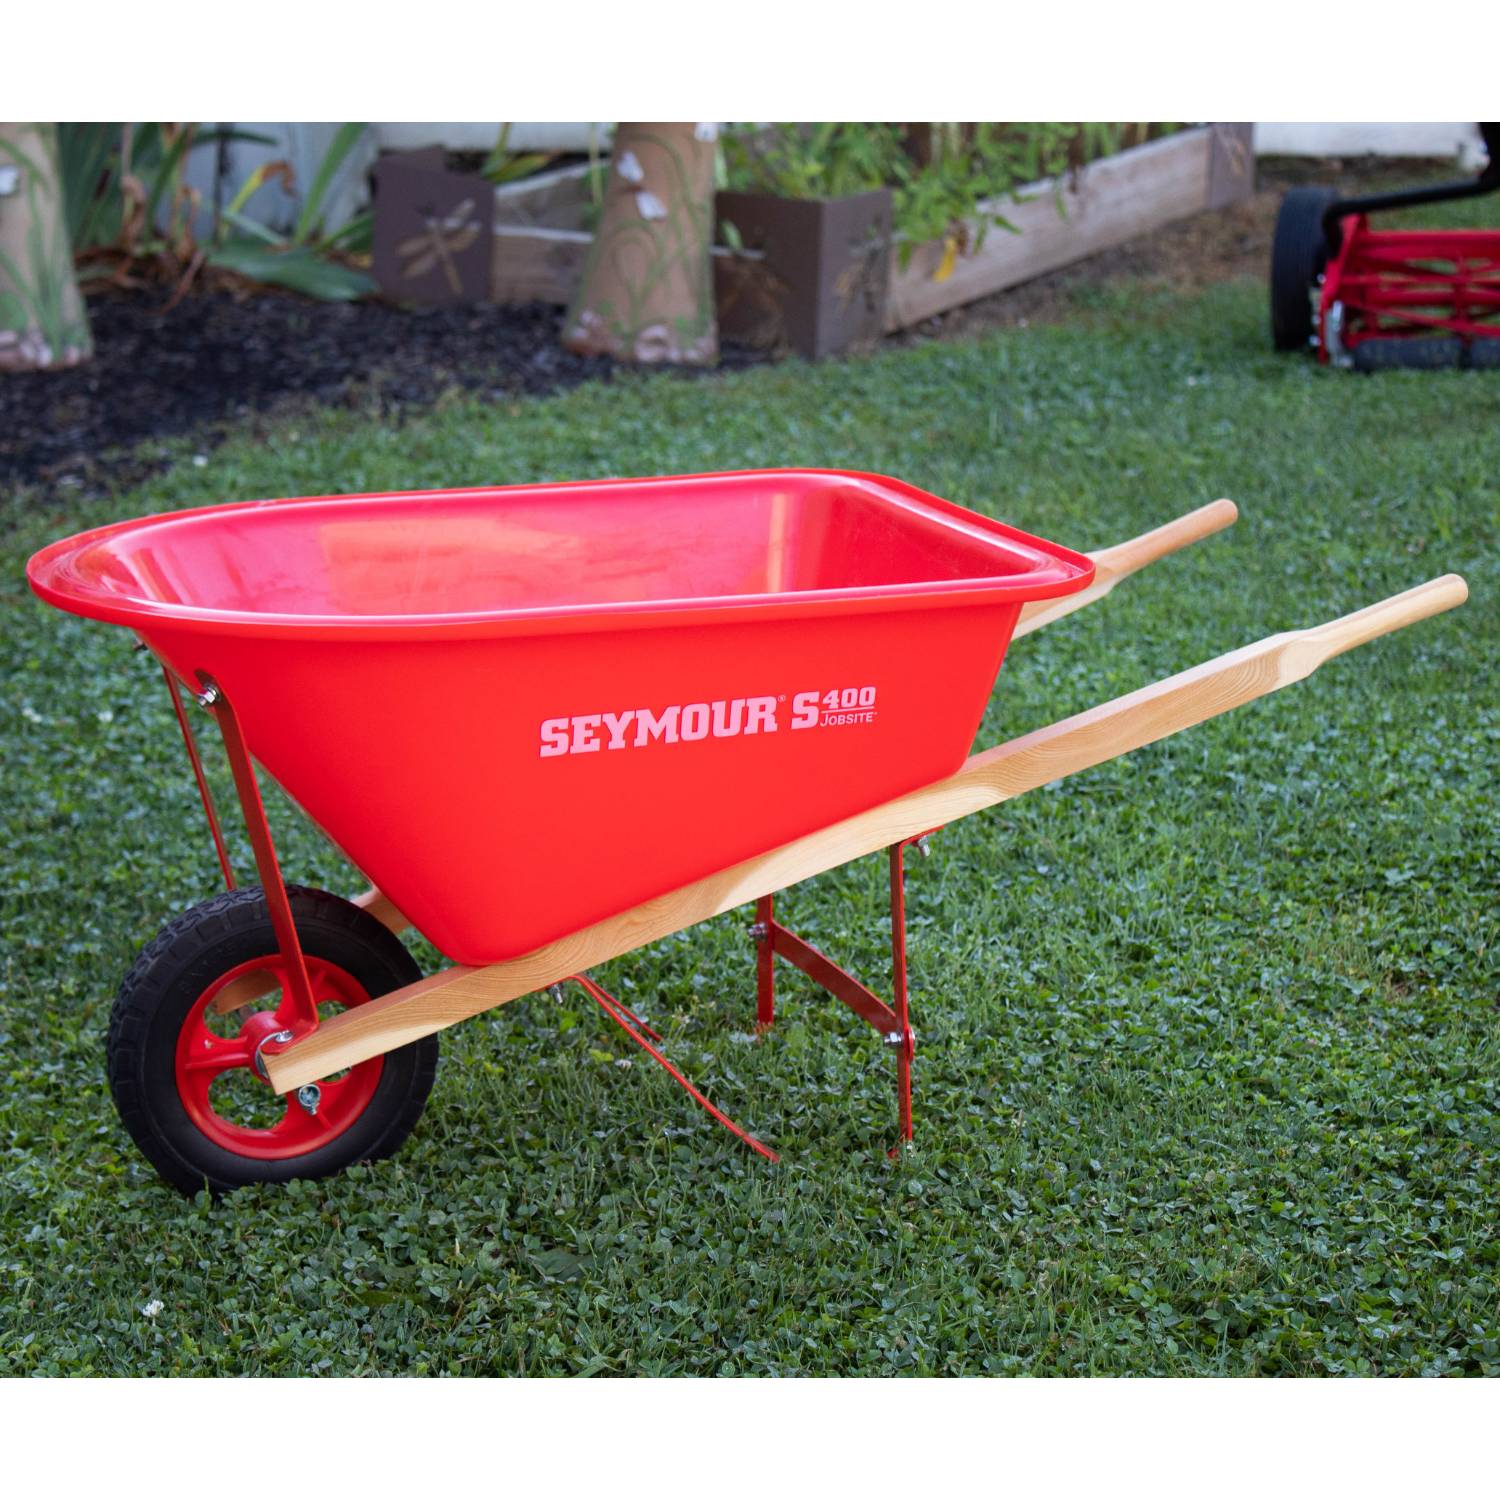 Seymour Fully Functional Metal Frame Poly Bed Wheelbarrow for Kids, Children, Red - image 3 of 4